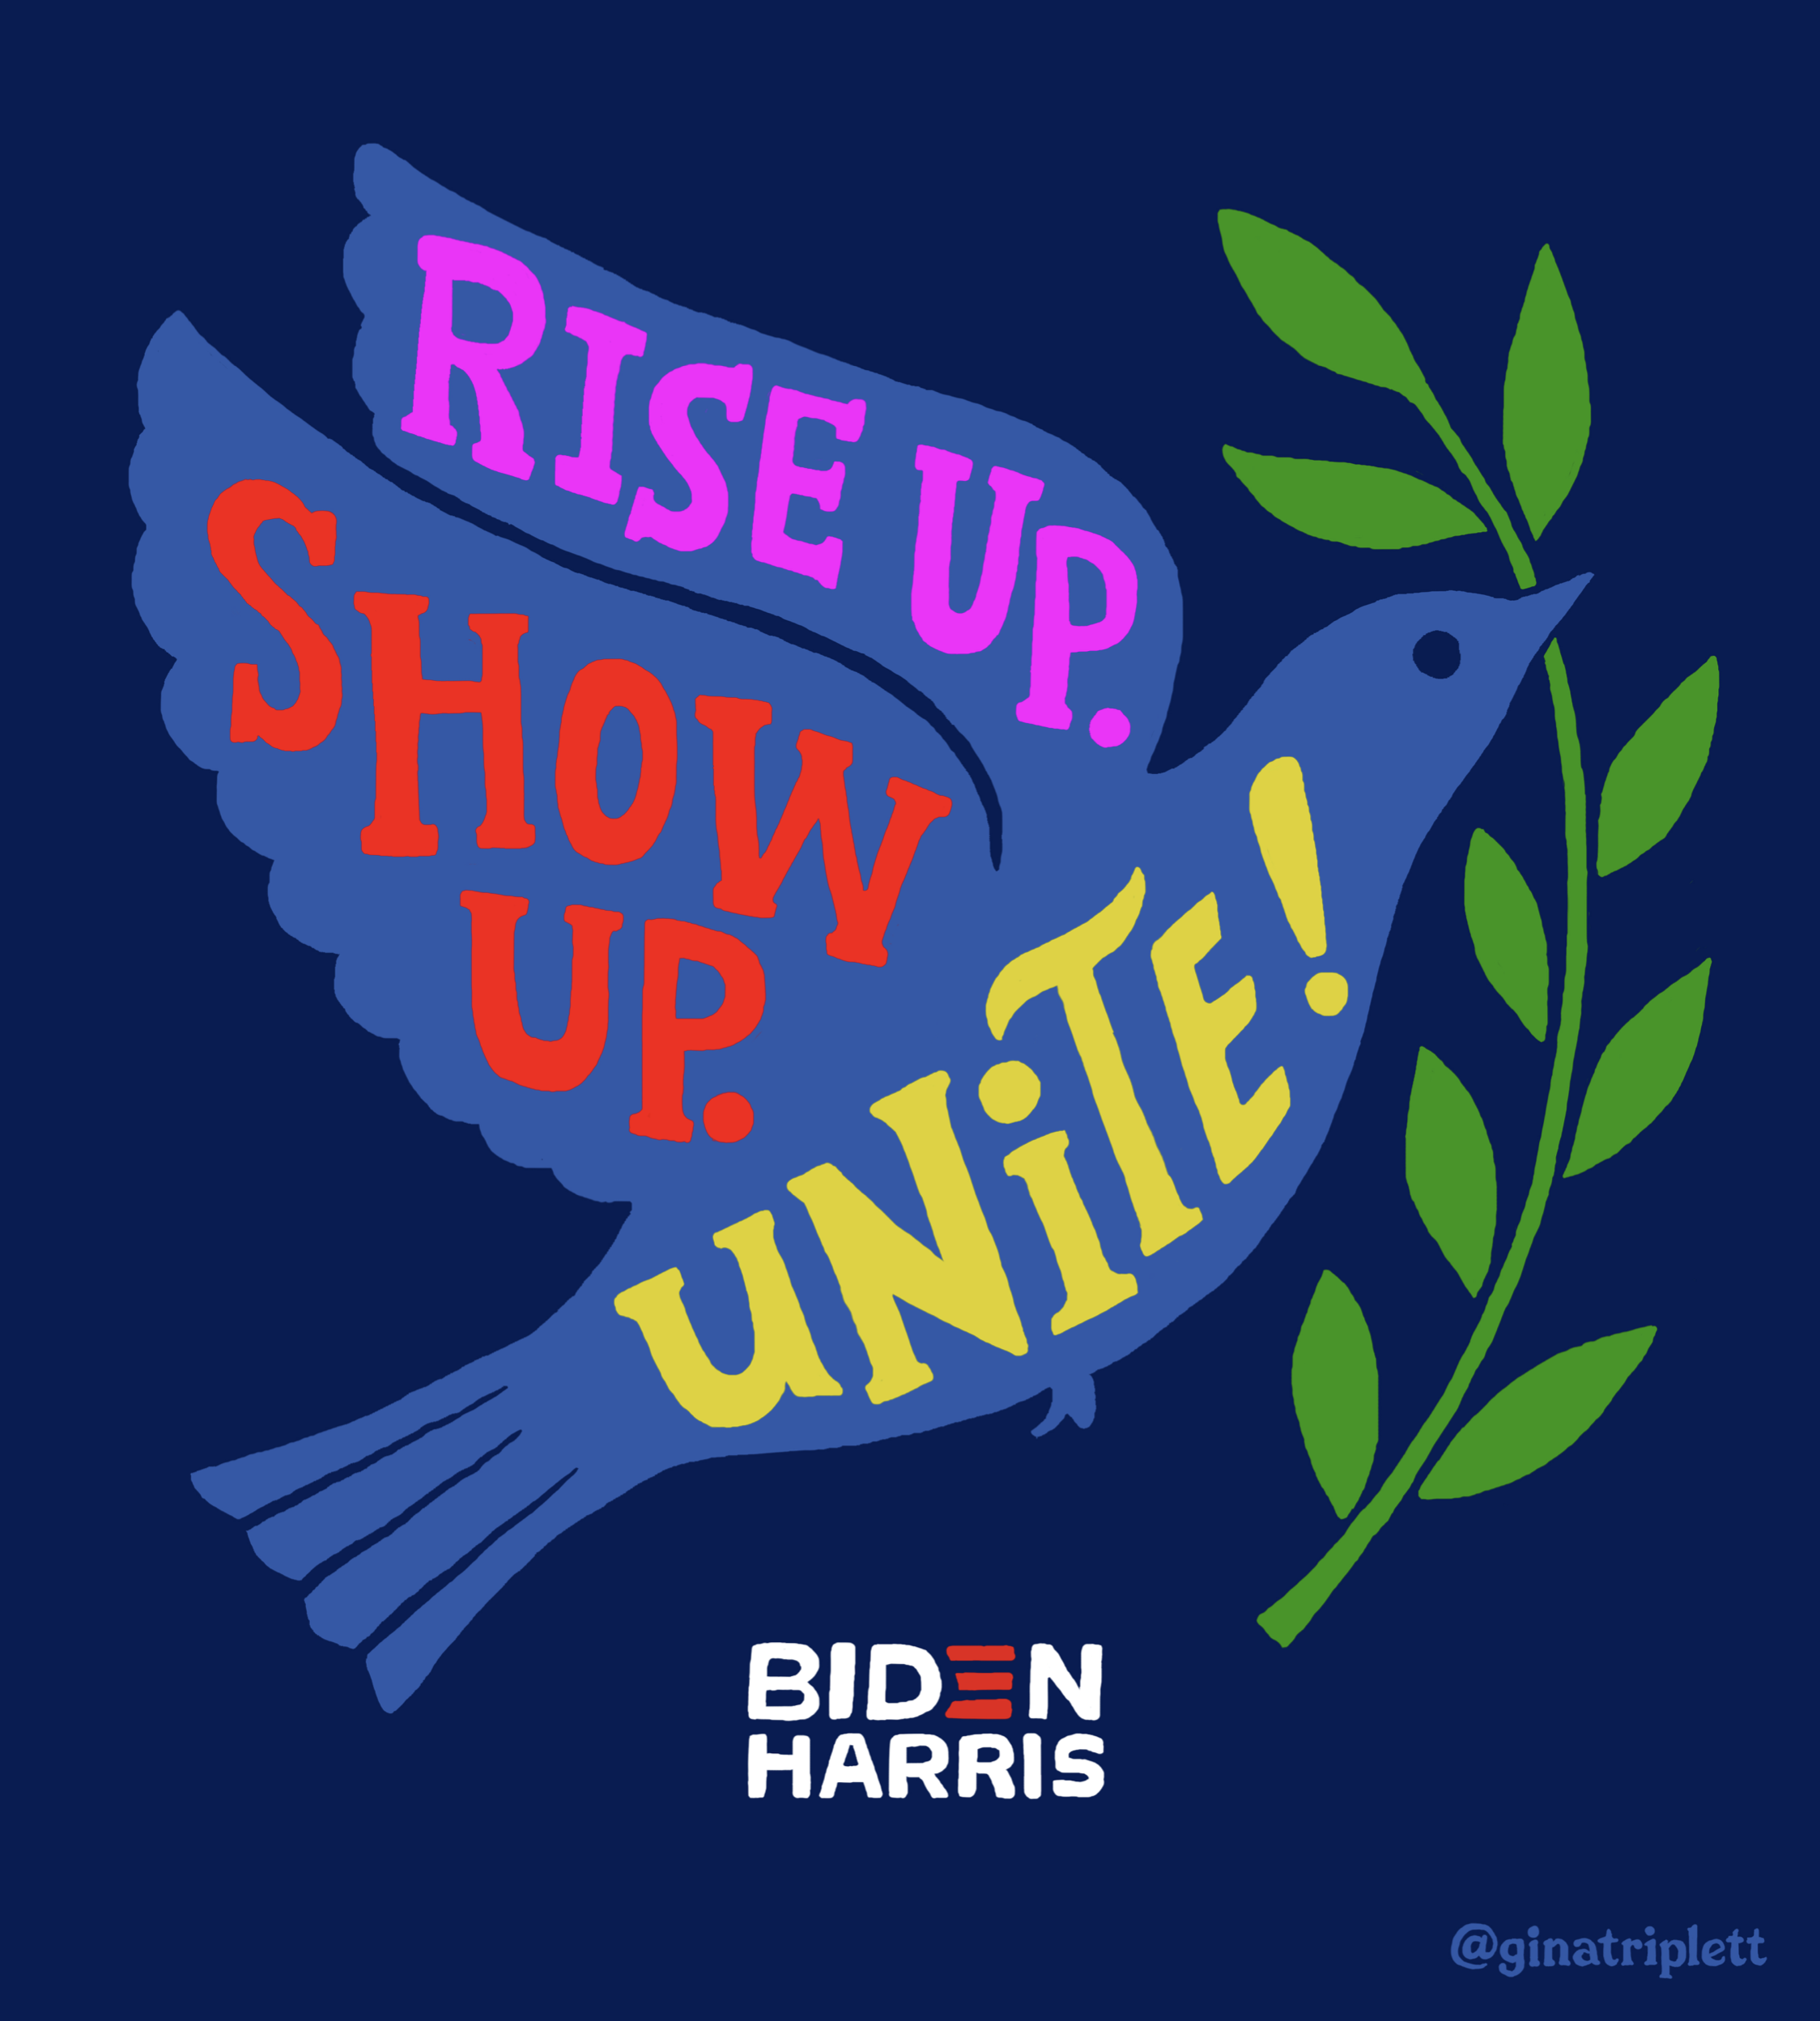 Lettering art of the phrase 'Rise up. Show up. Unite!' by Gina Triplett